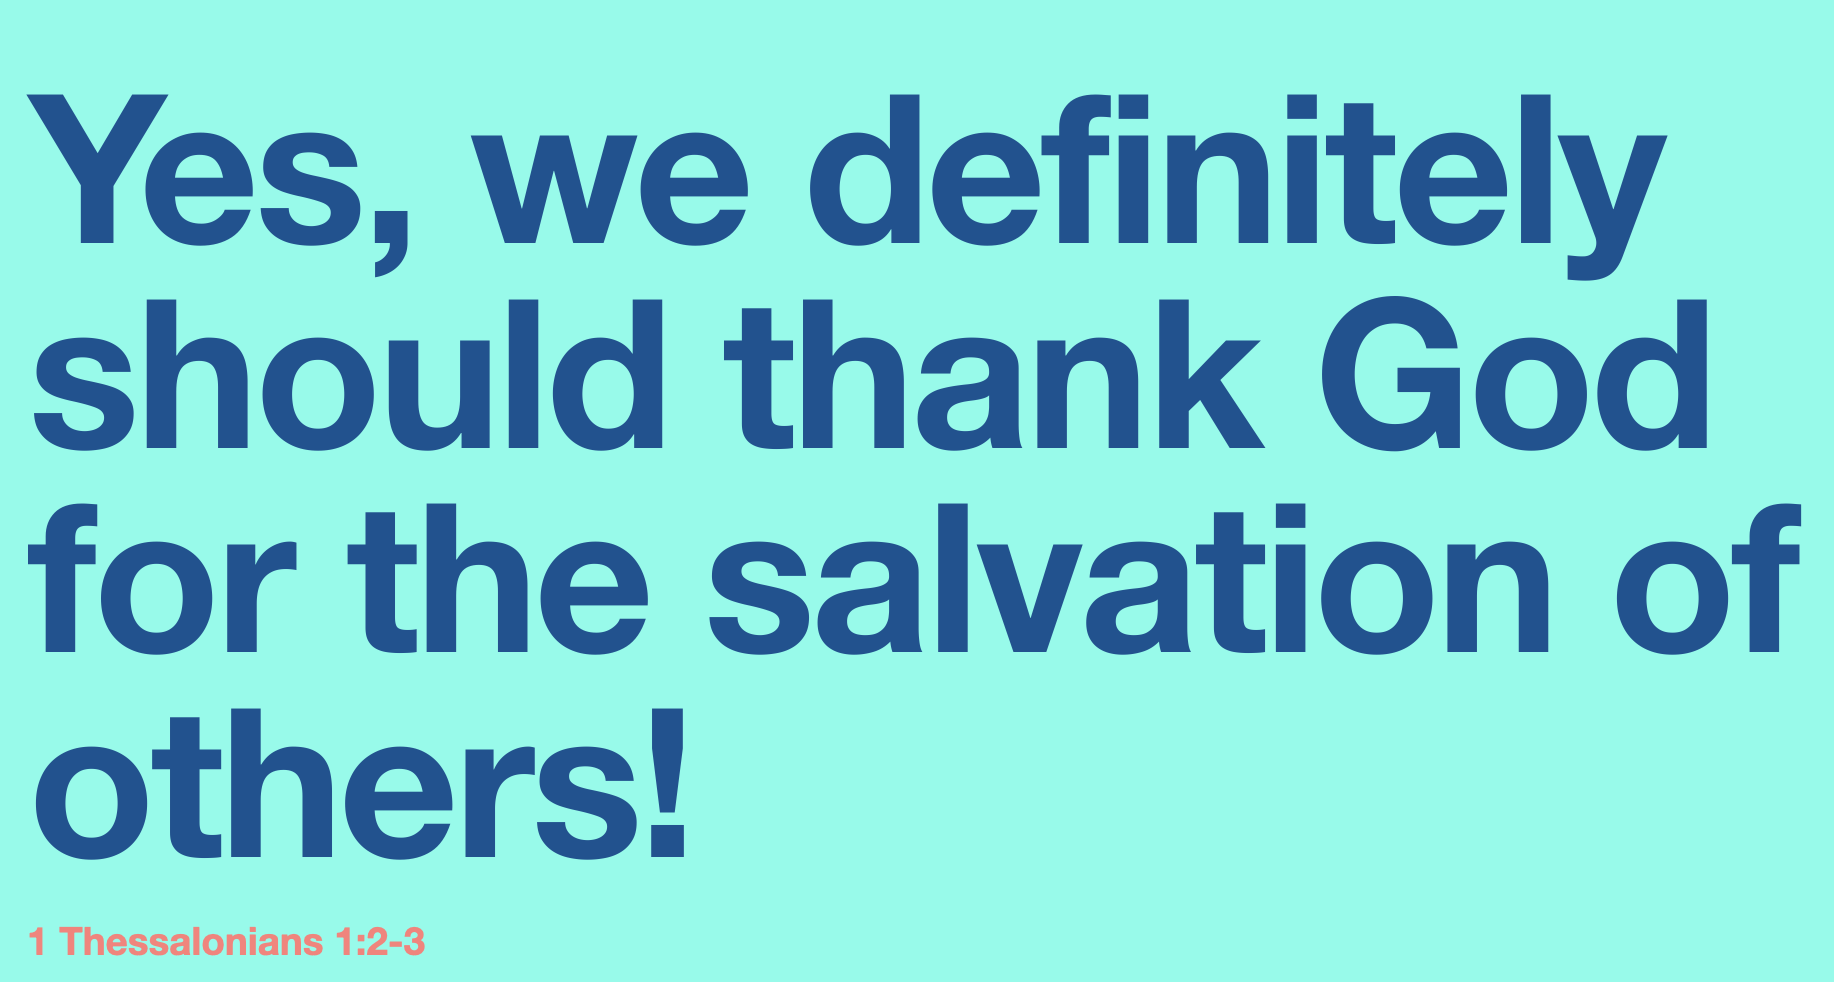 1 Thessalonians 1:2-3 - We definitely should thank God for the salvation of others